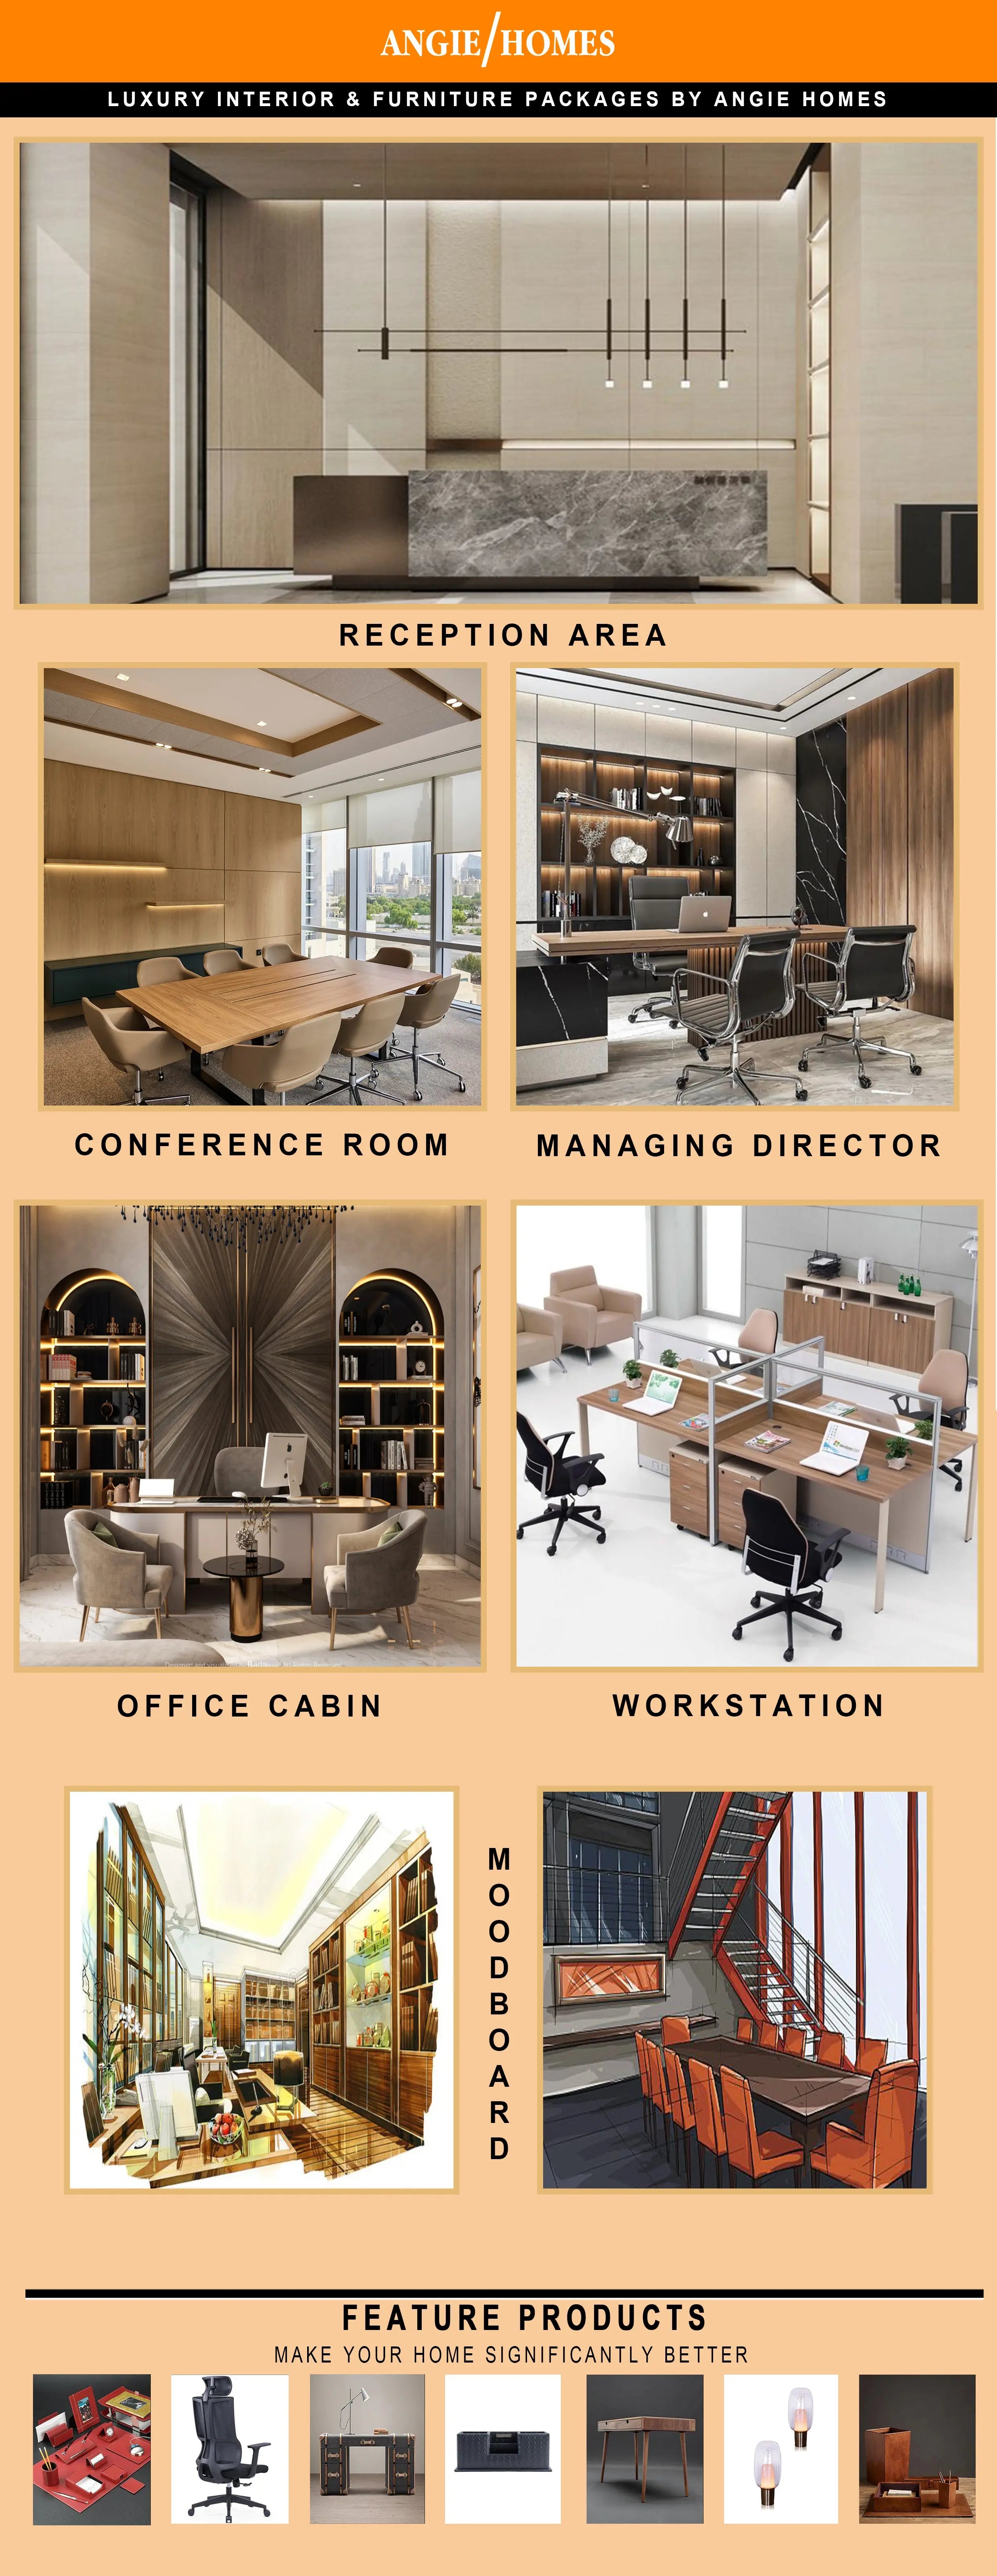 Monk Small Office Interiors ANGIE HOMES